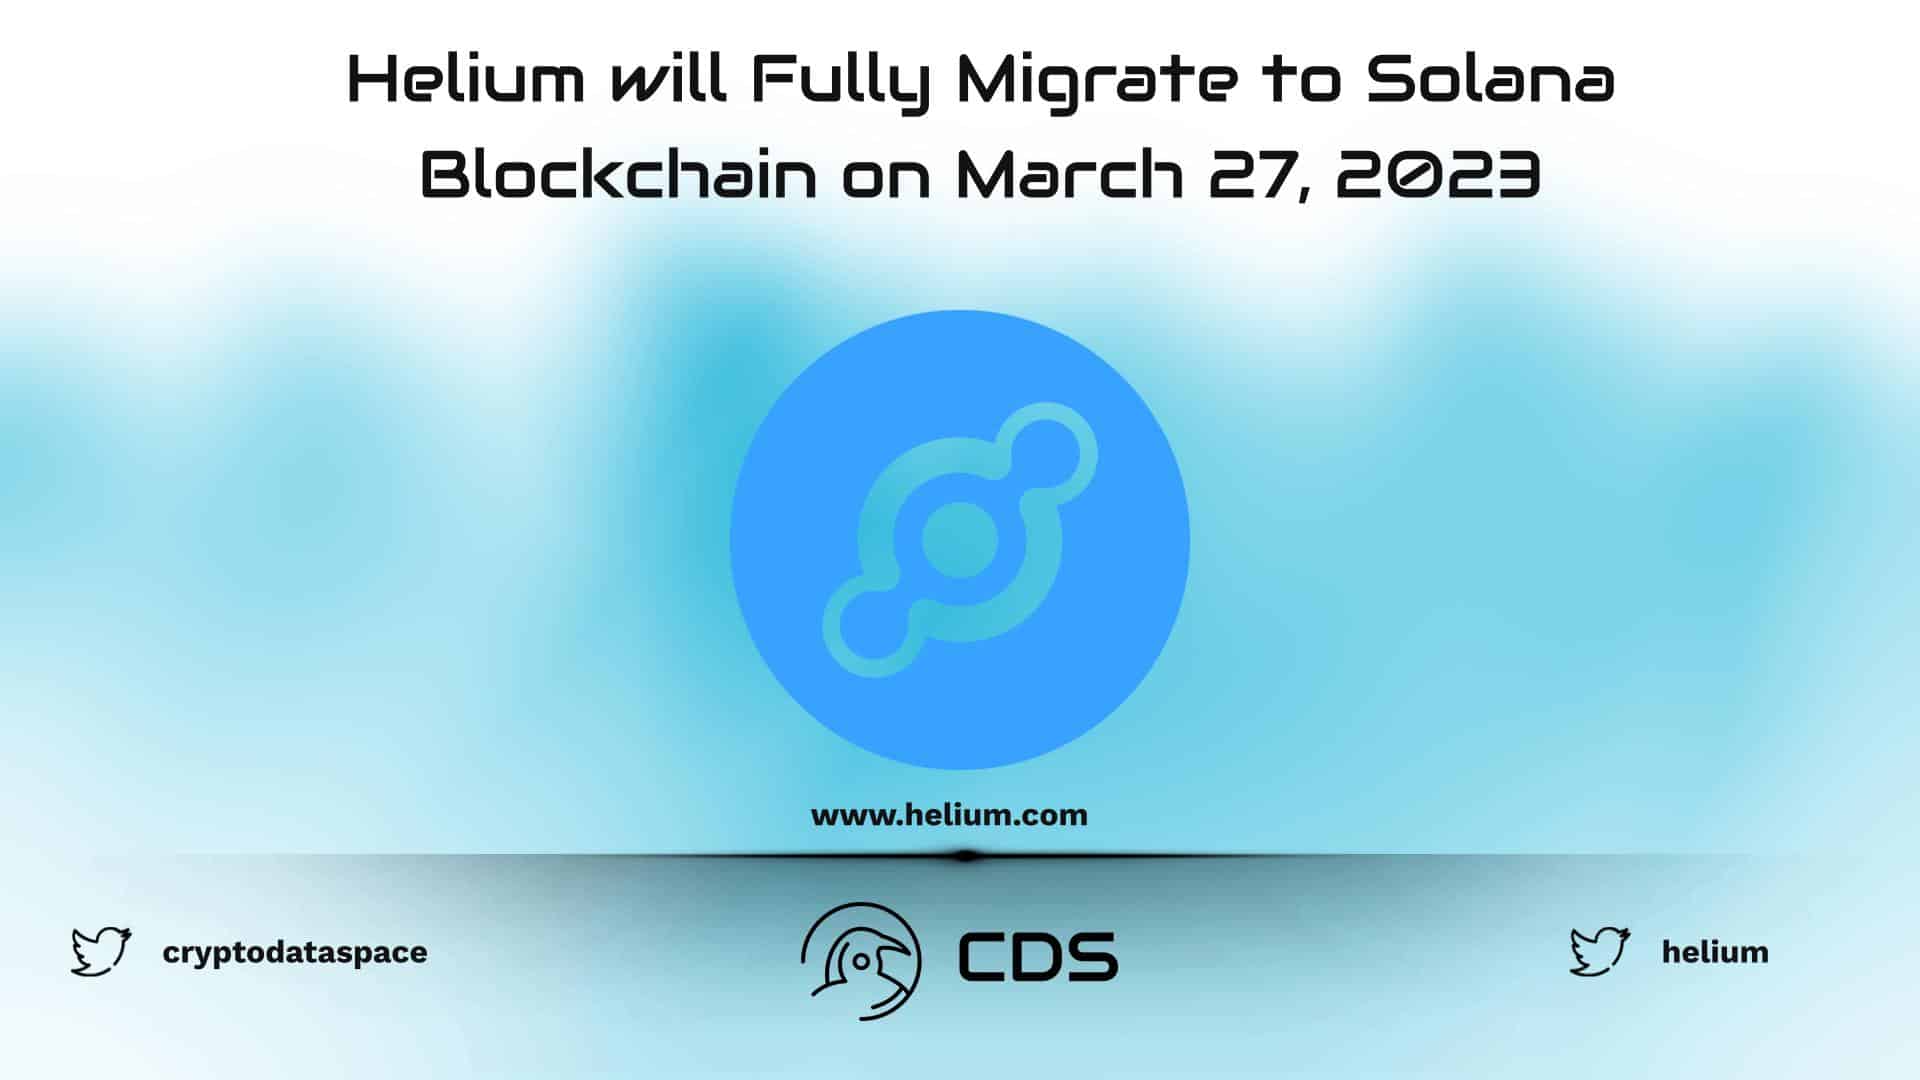 Helium will Fully Migrate to Solana Blockchain on March 27, 2023